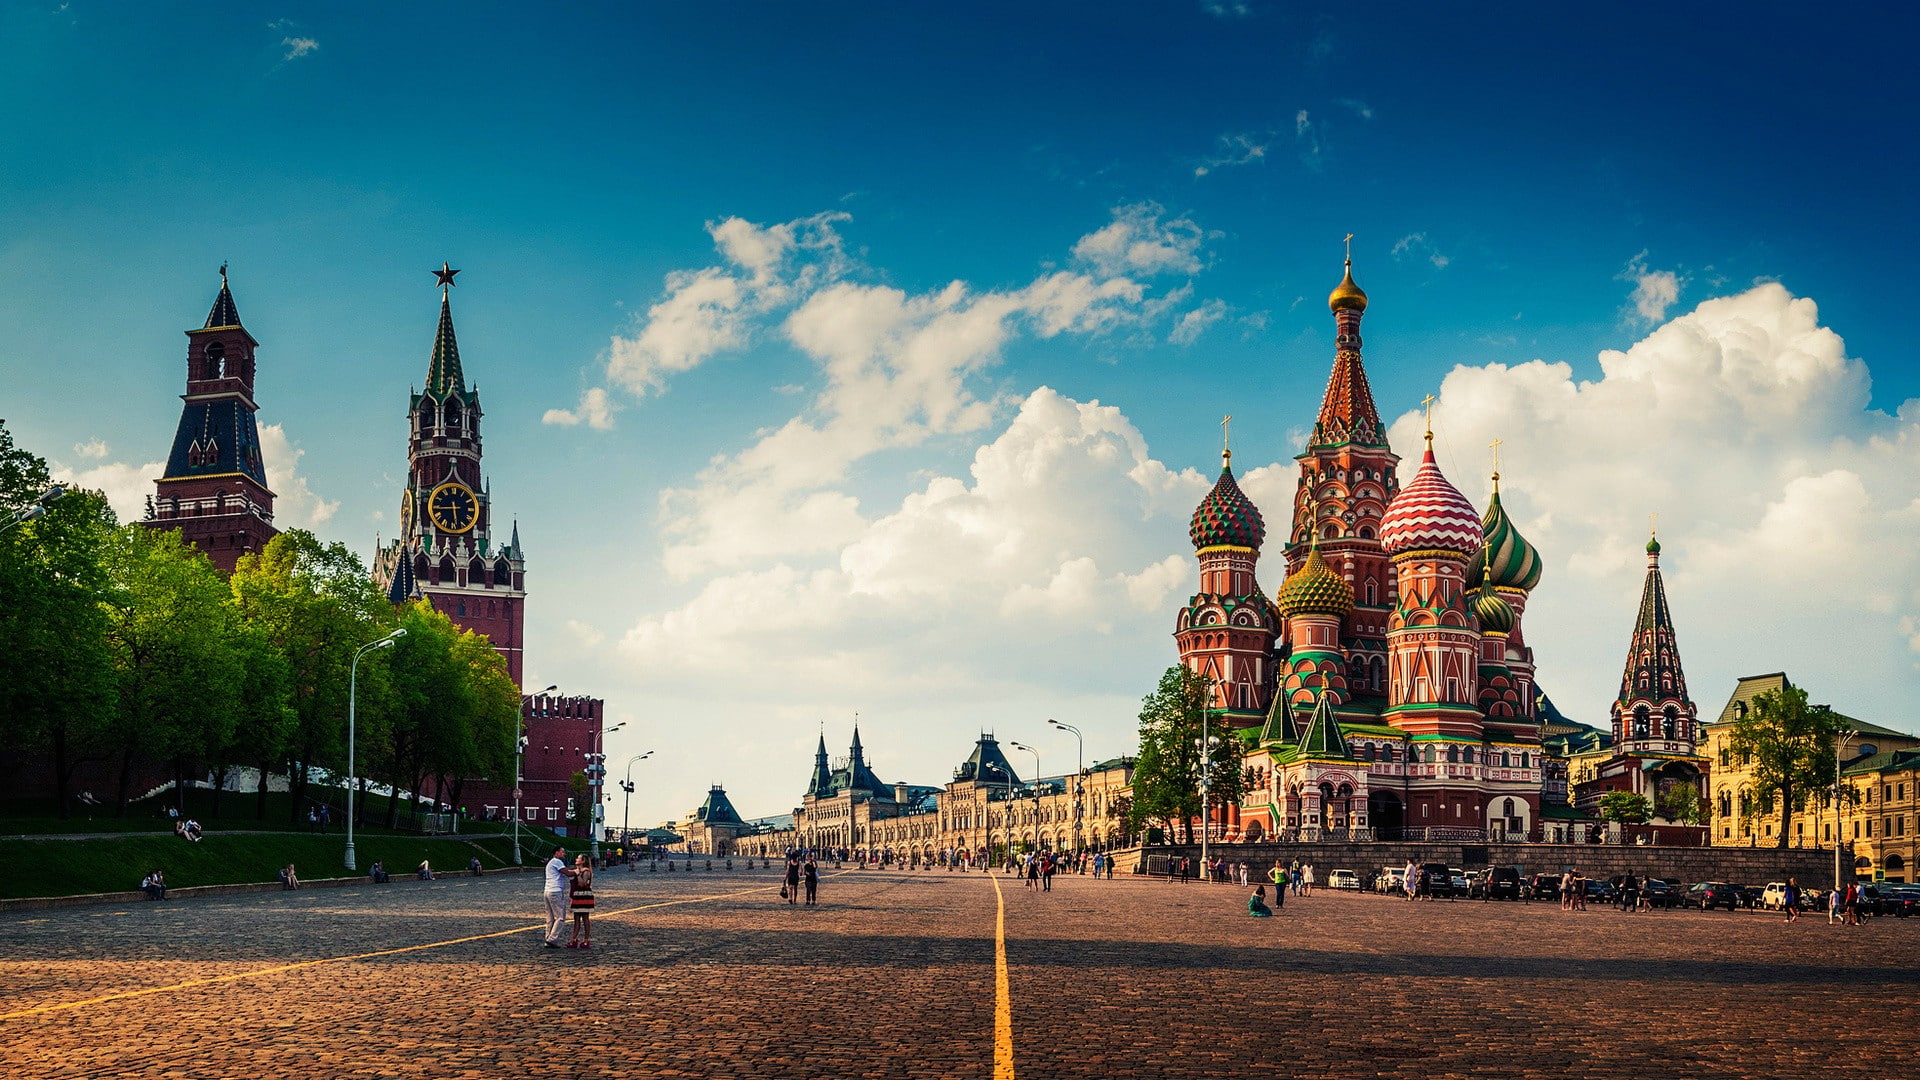 cityscape architecture city building urban moscow russia kremlin town square cathedral old building people street trees clouds clock towers red square pavers capital